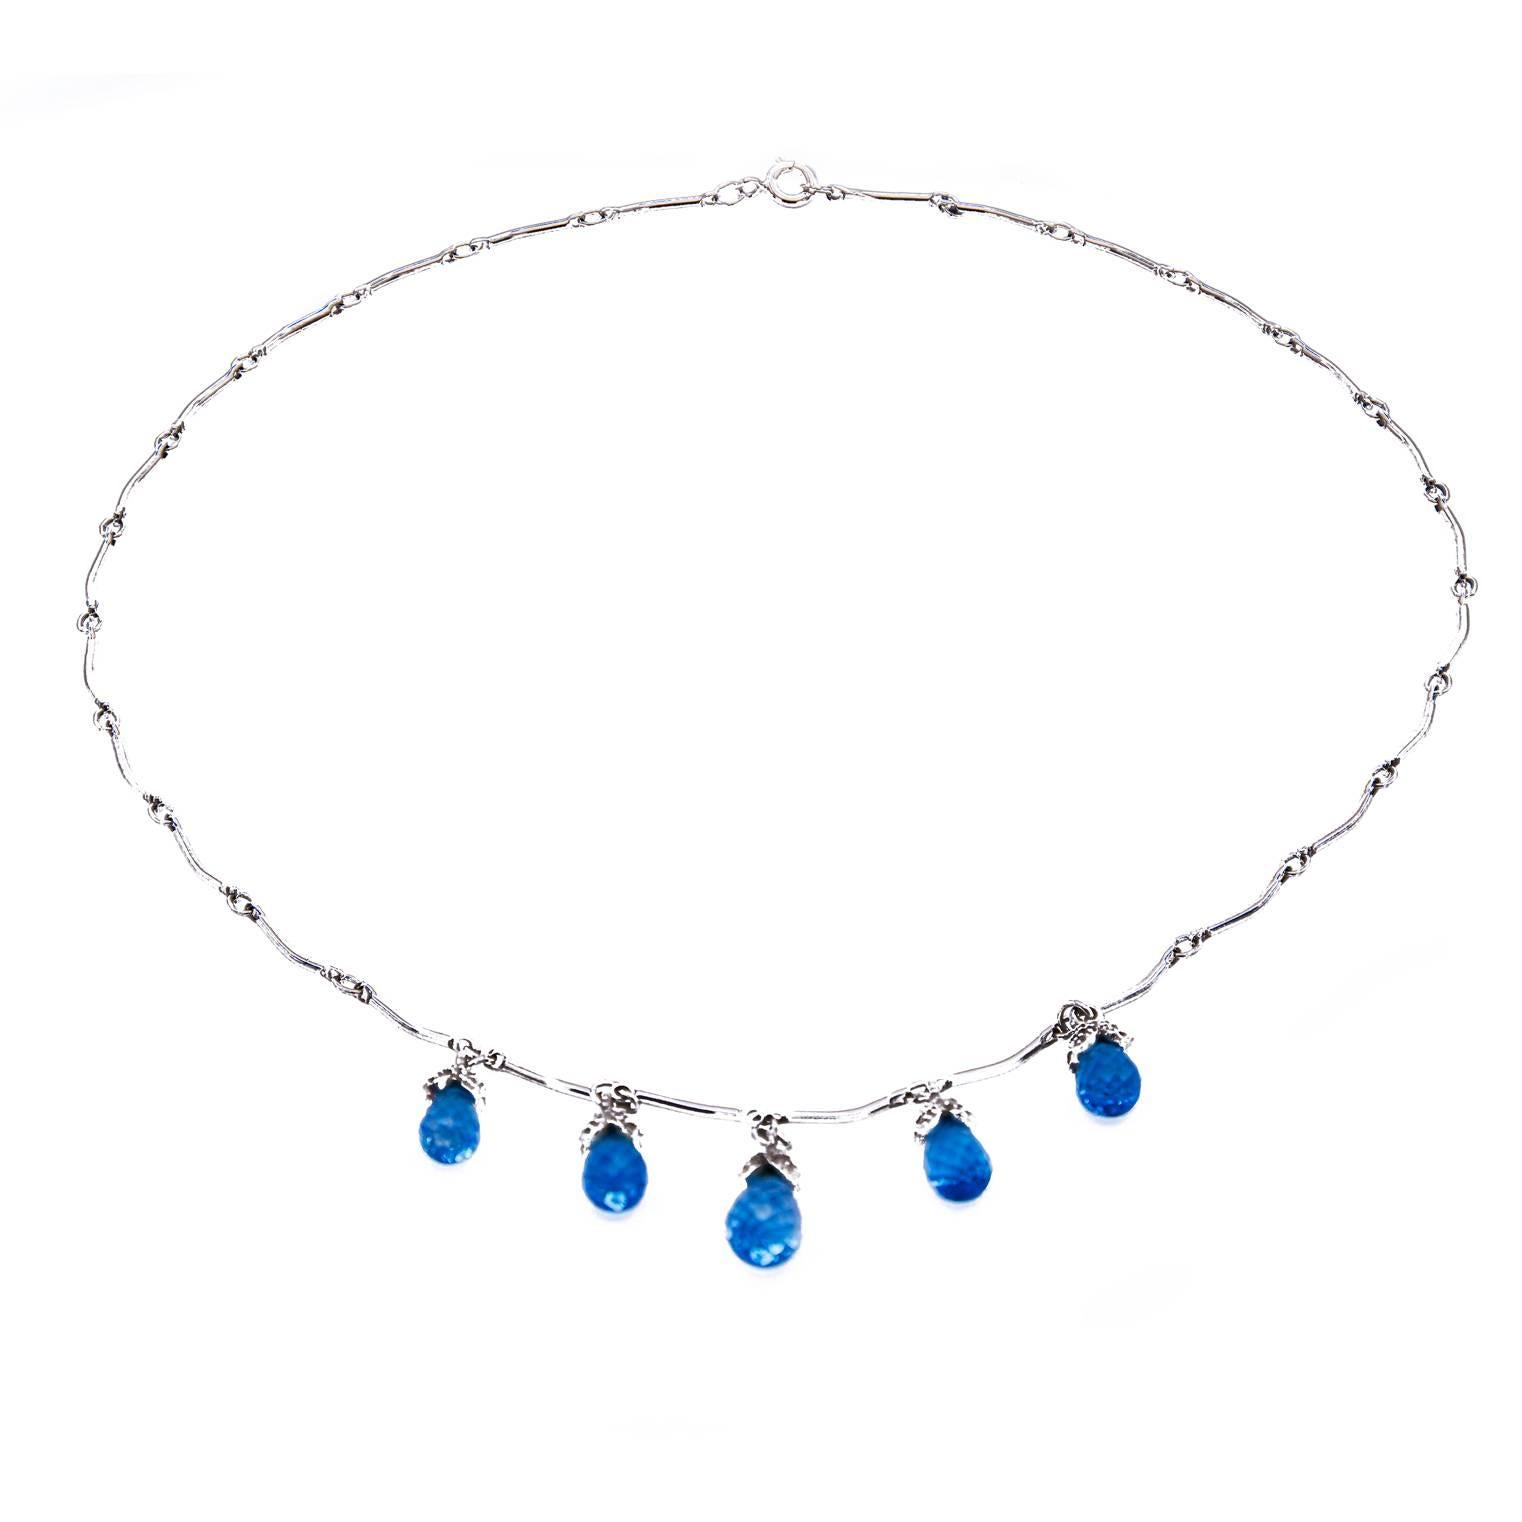 Whimsical droplets of crystal clear blue topaz 'drip' from diamond encrusted buds to create this romantic necklace. Spring is just around the corner and this necklace is just in time to add to your wardrobe! 